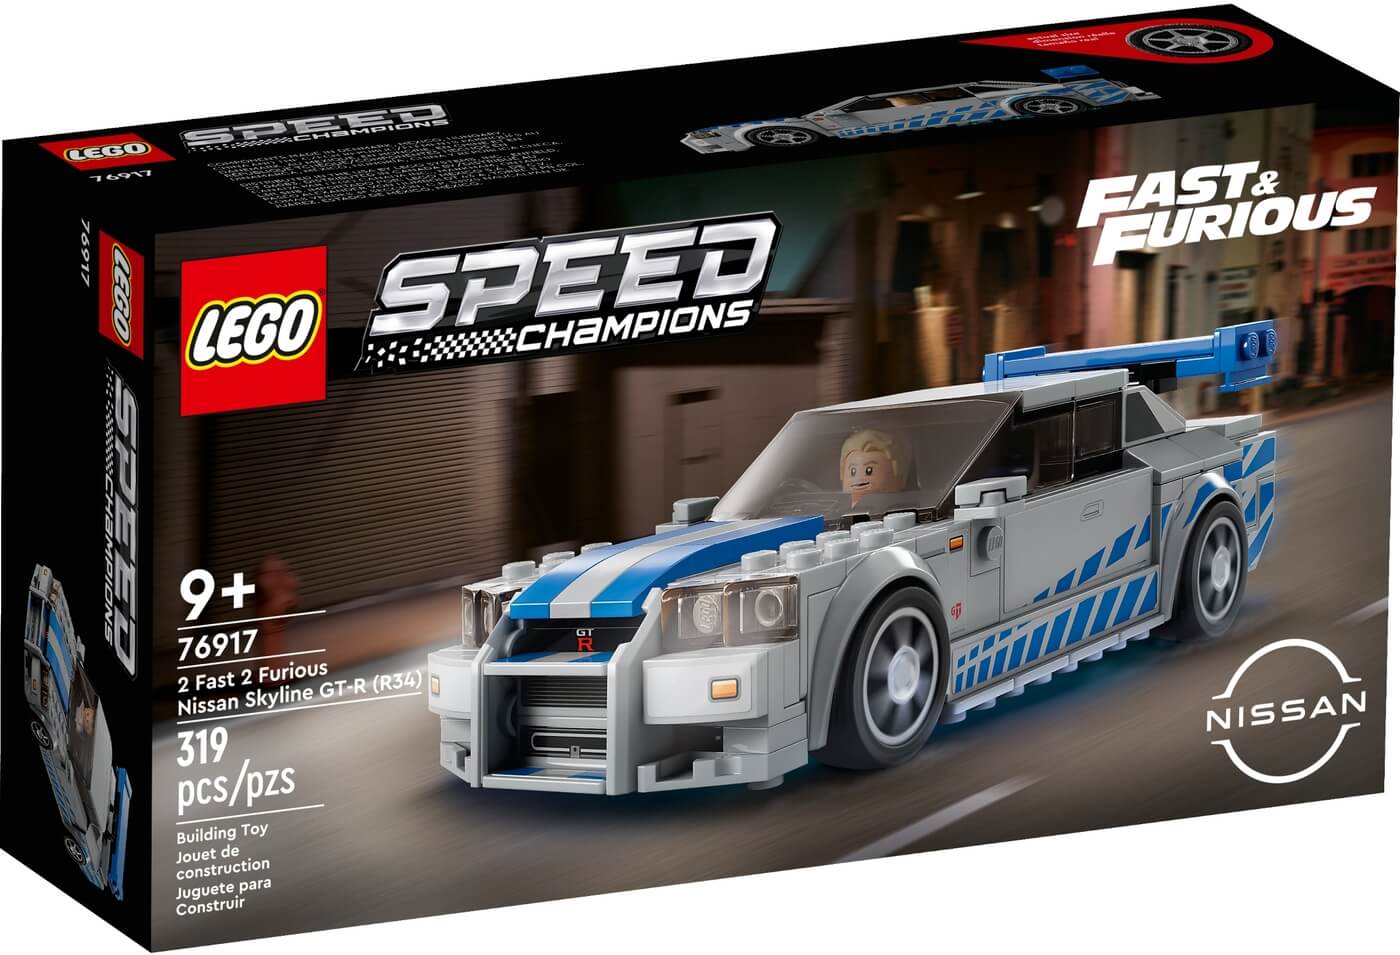 Nissan Skyline GT-R R34 Fast and Furious ( Lego 76917 ) imagen g